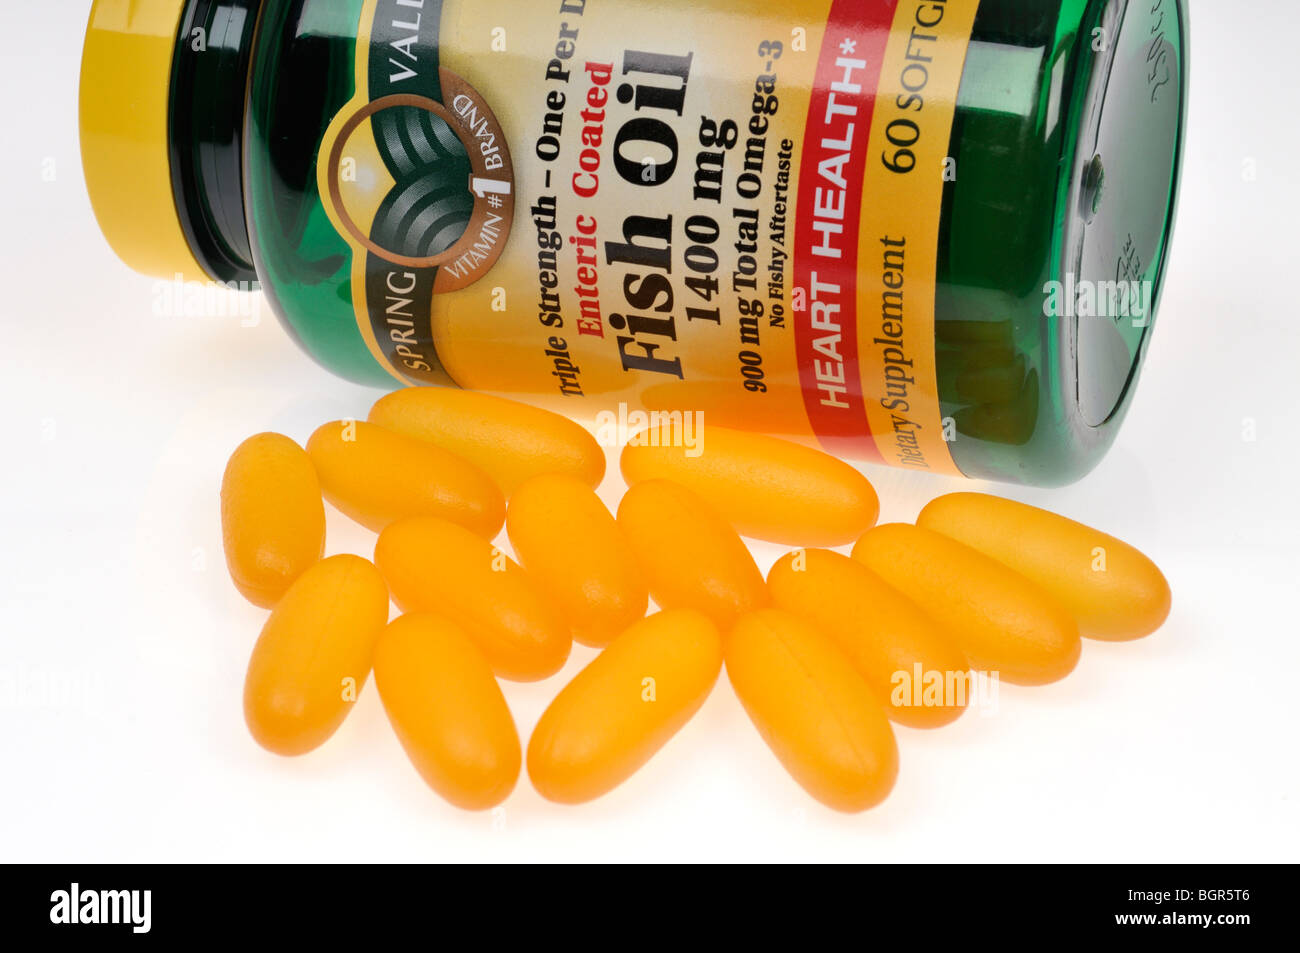 Softgel caplets and a bottle of Fish Oil dietary supplement. Stock Photo